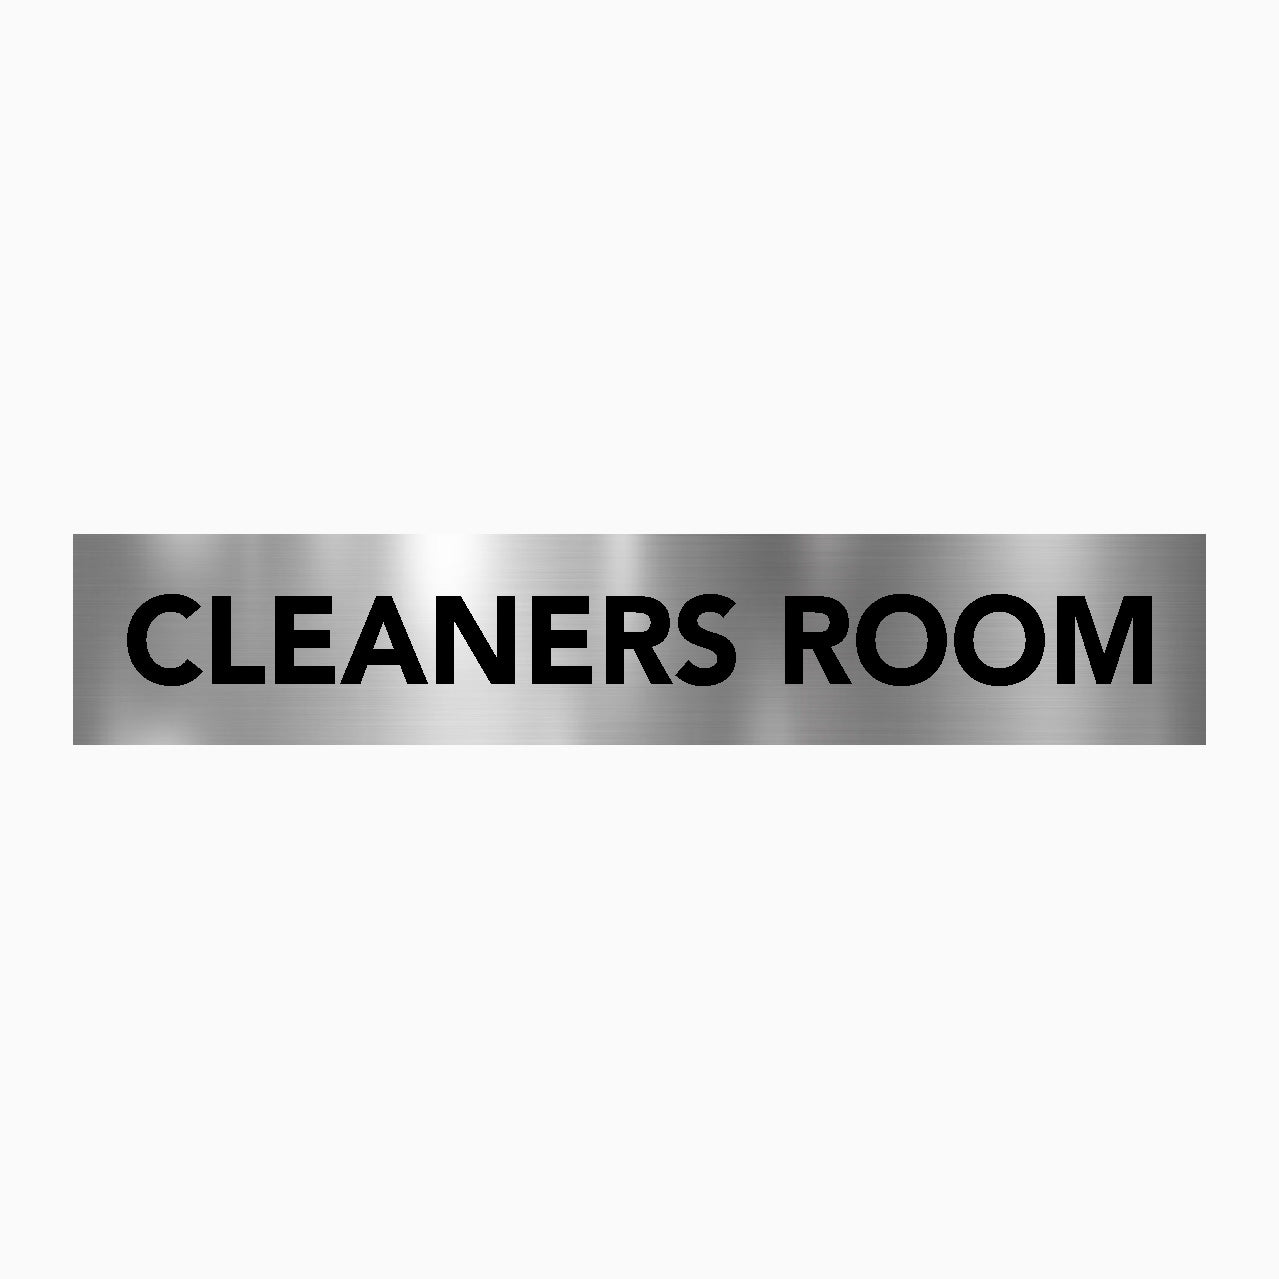 CLEANERS ROOM SIGN